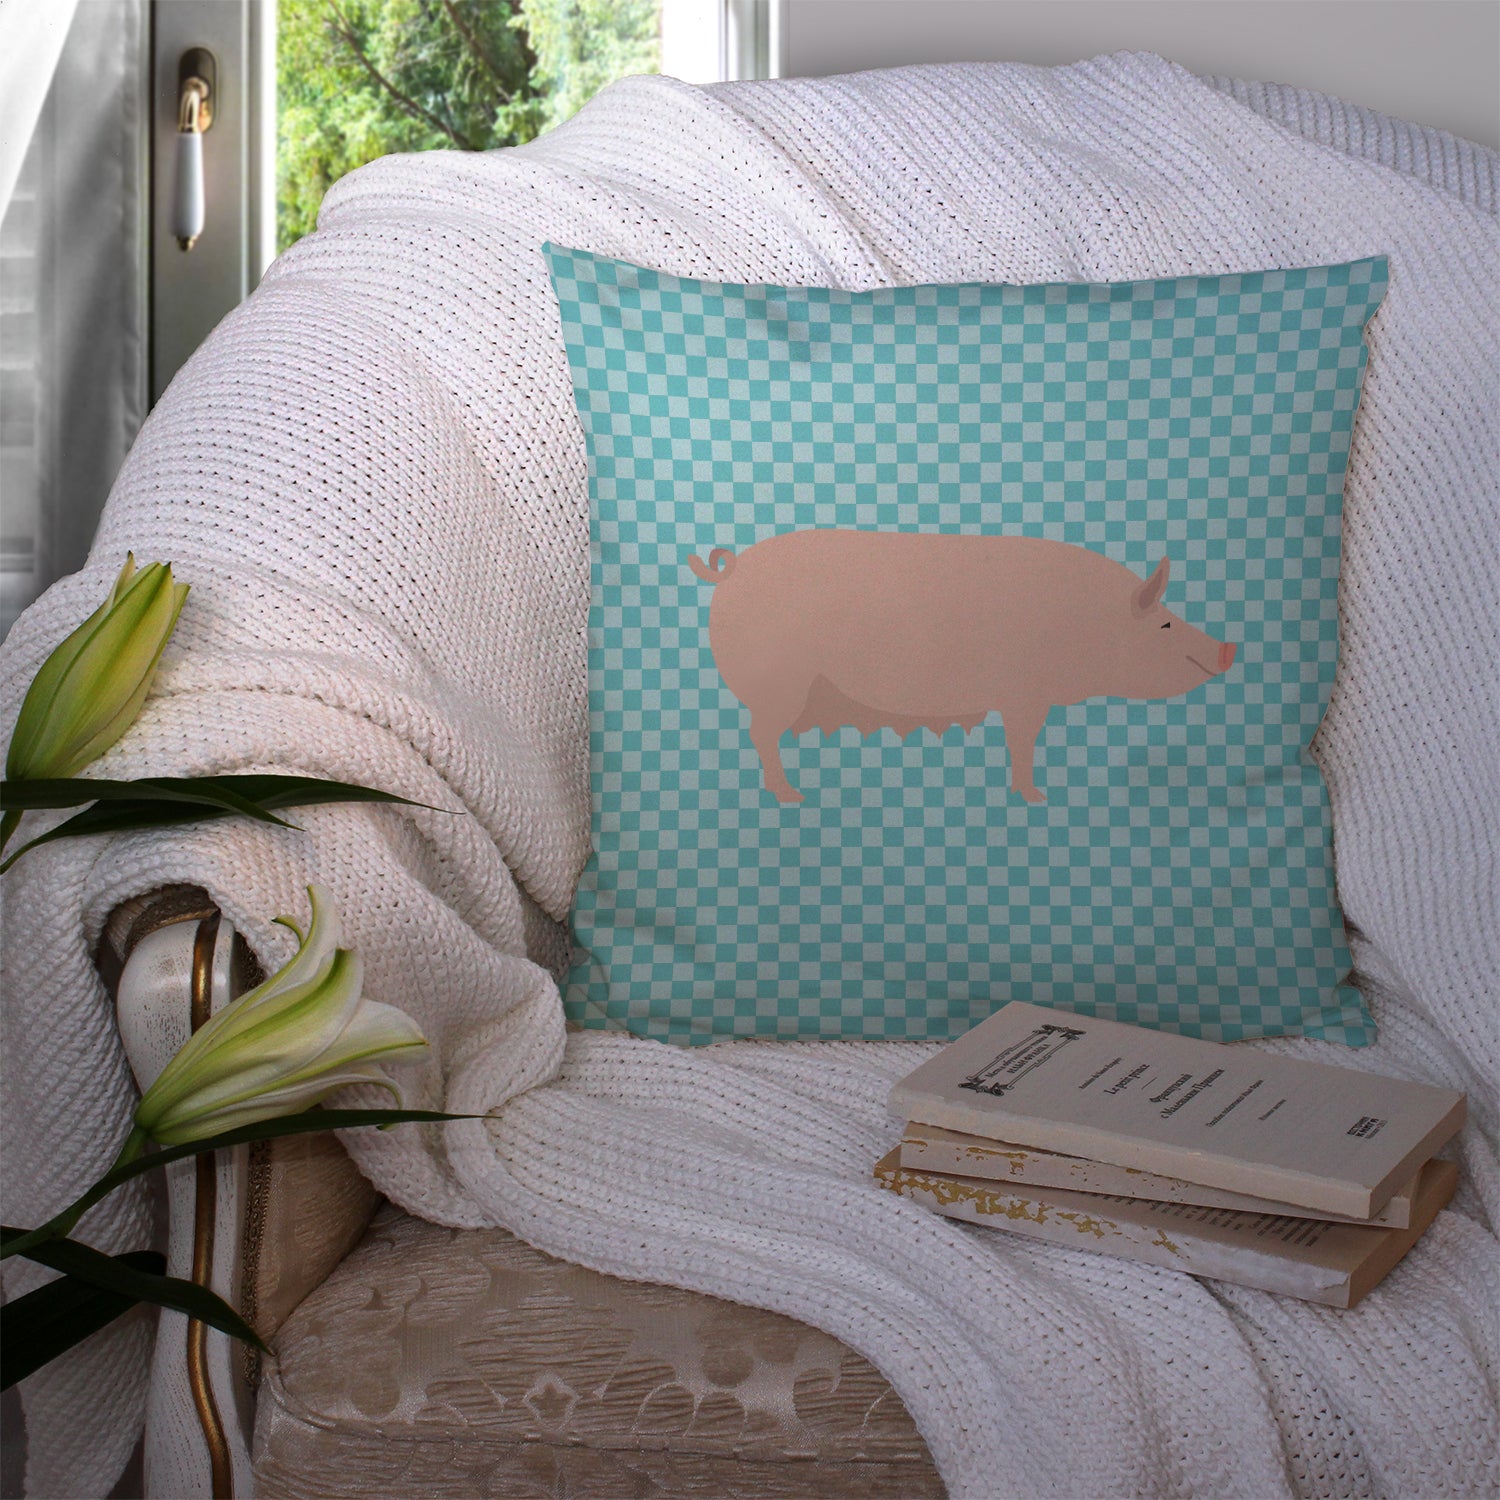 English Large White Pig Blue Check Fabric Decorative Pillow BB8112PW1414 - the-store.com